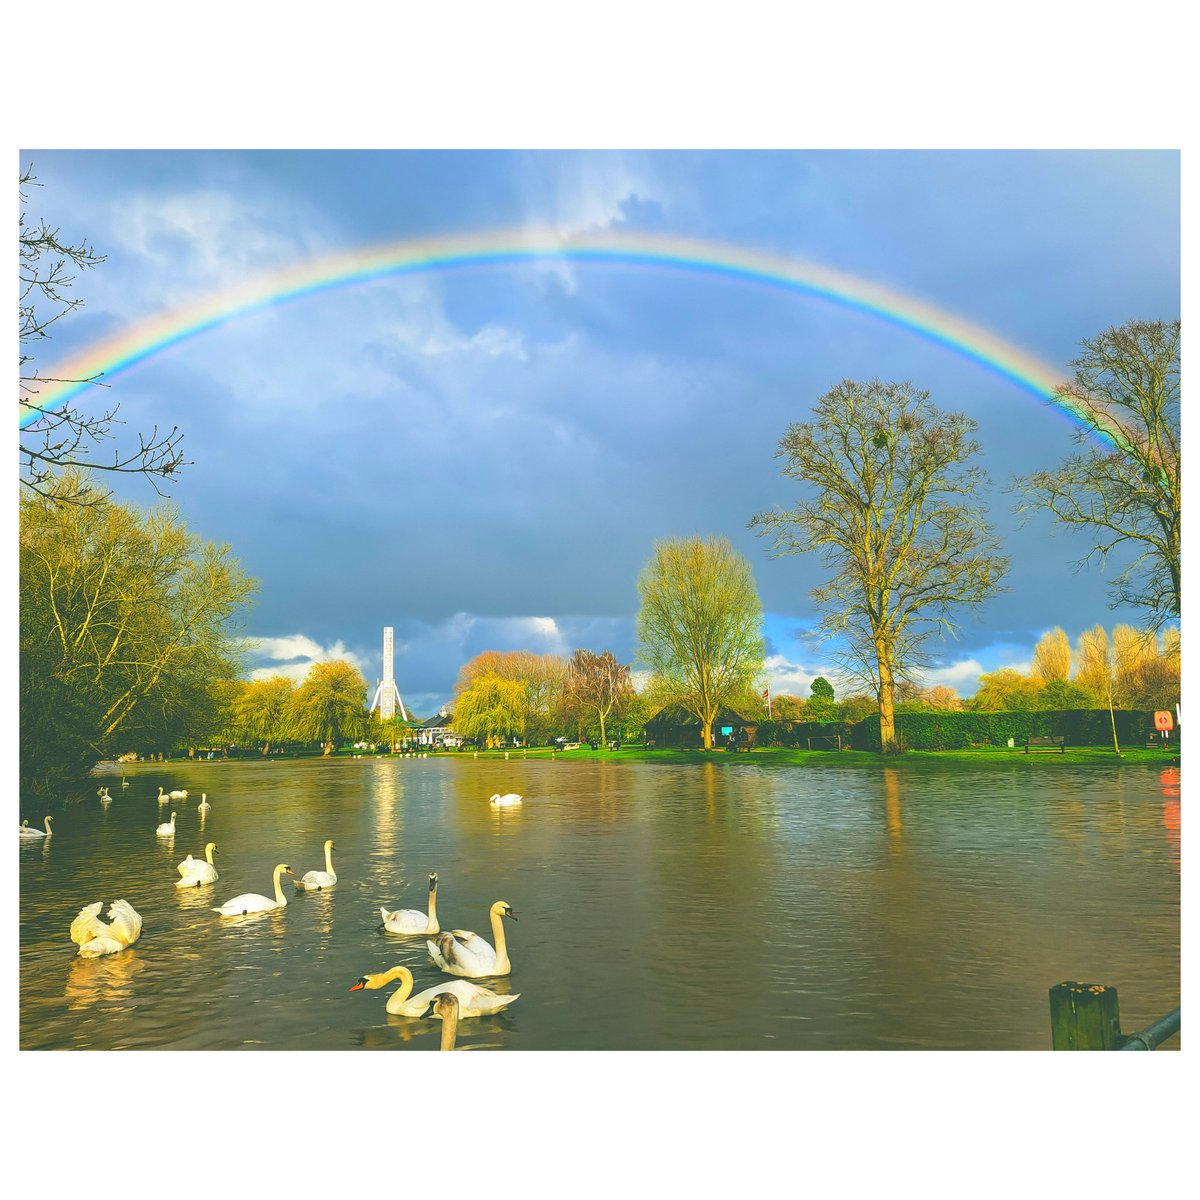 The River And The Rainbow.
#StratfordUponAvon